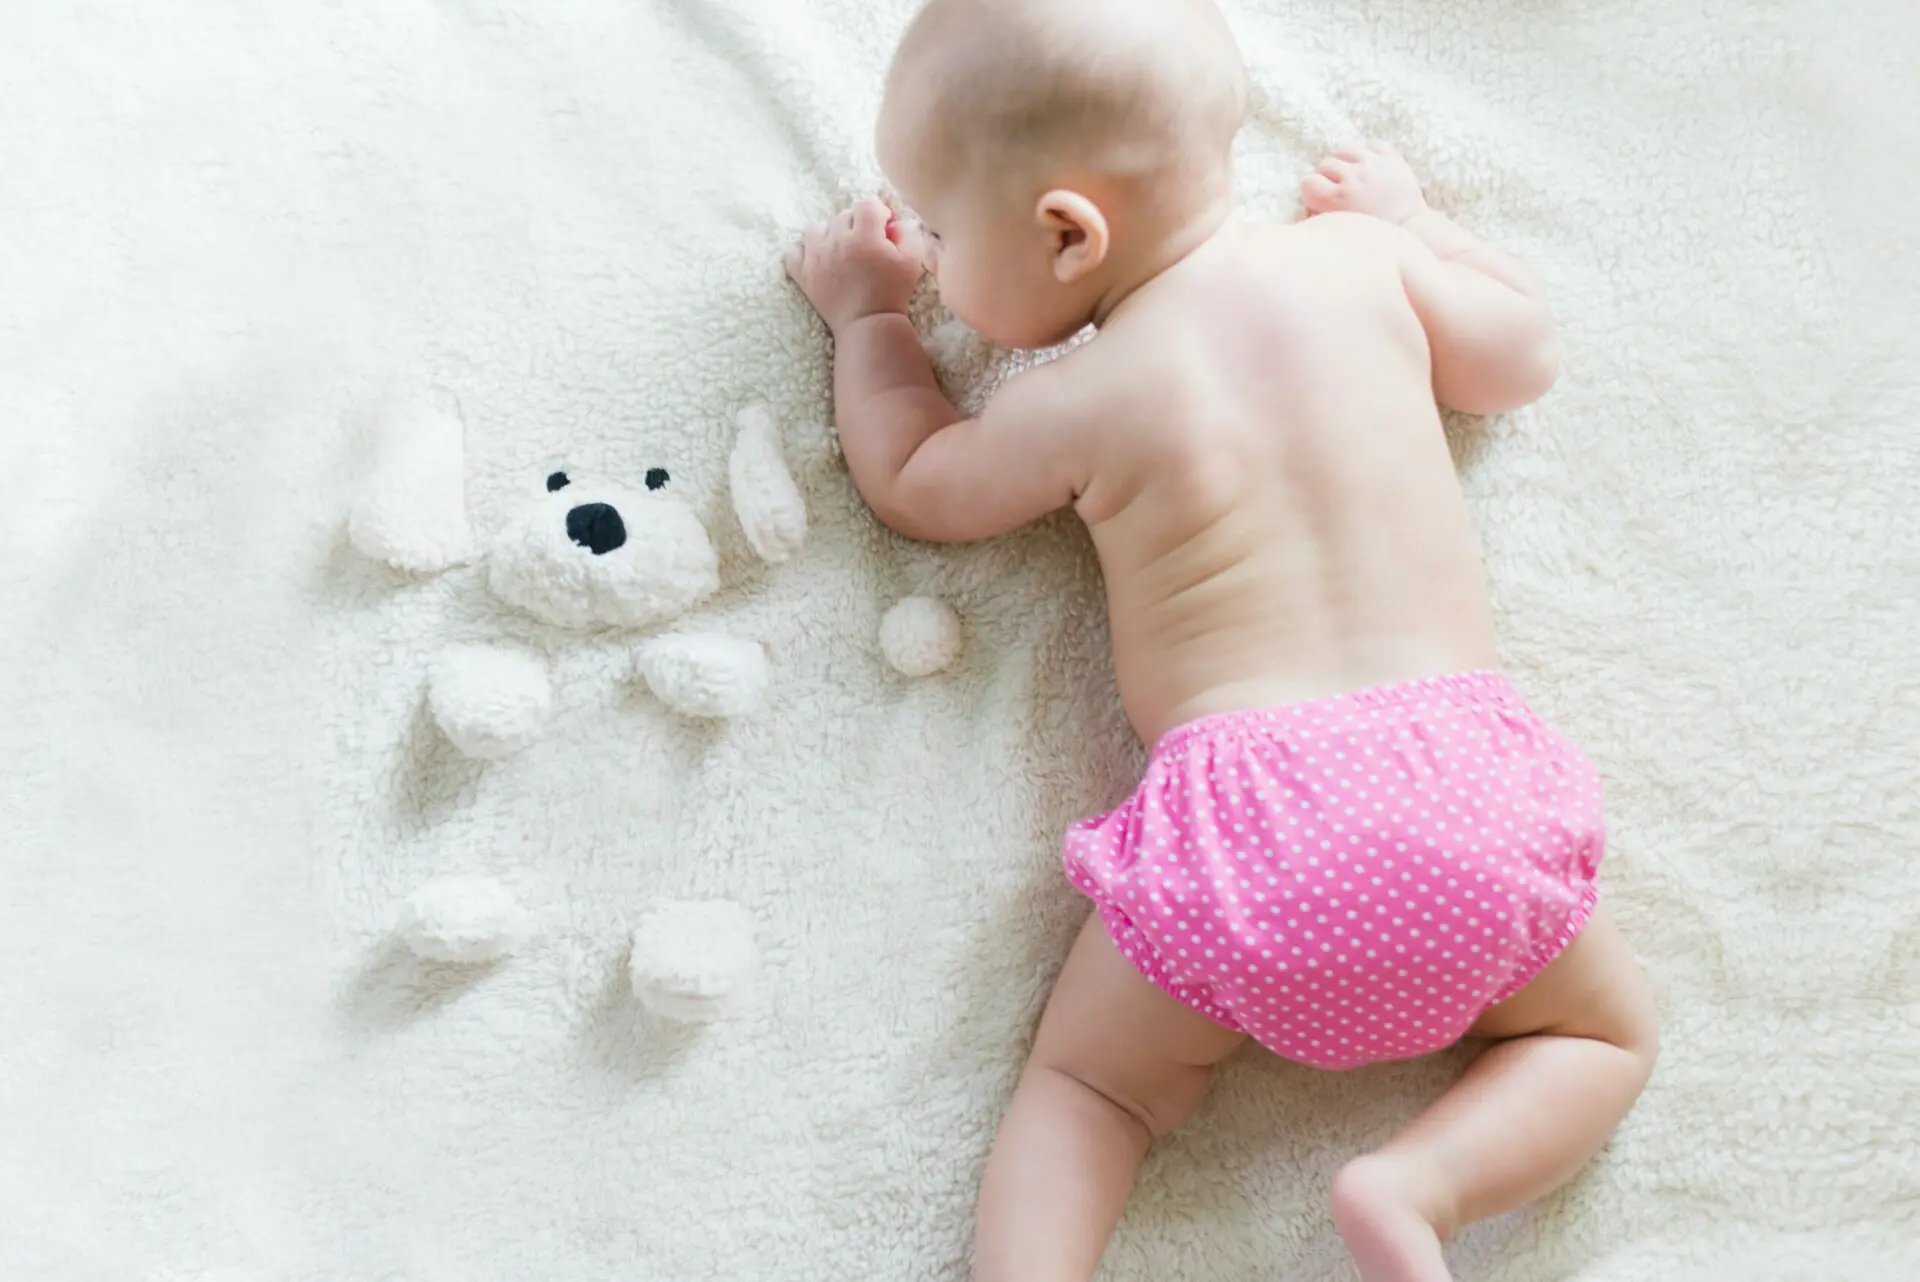 A Complete Guide to Organic Diapers for Your Baby’s Comfort